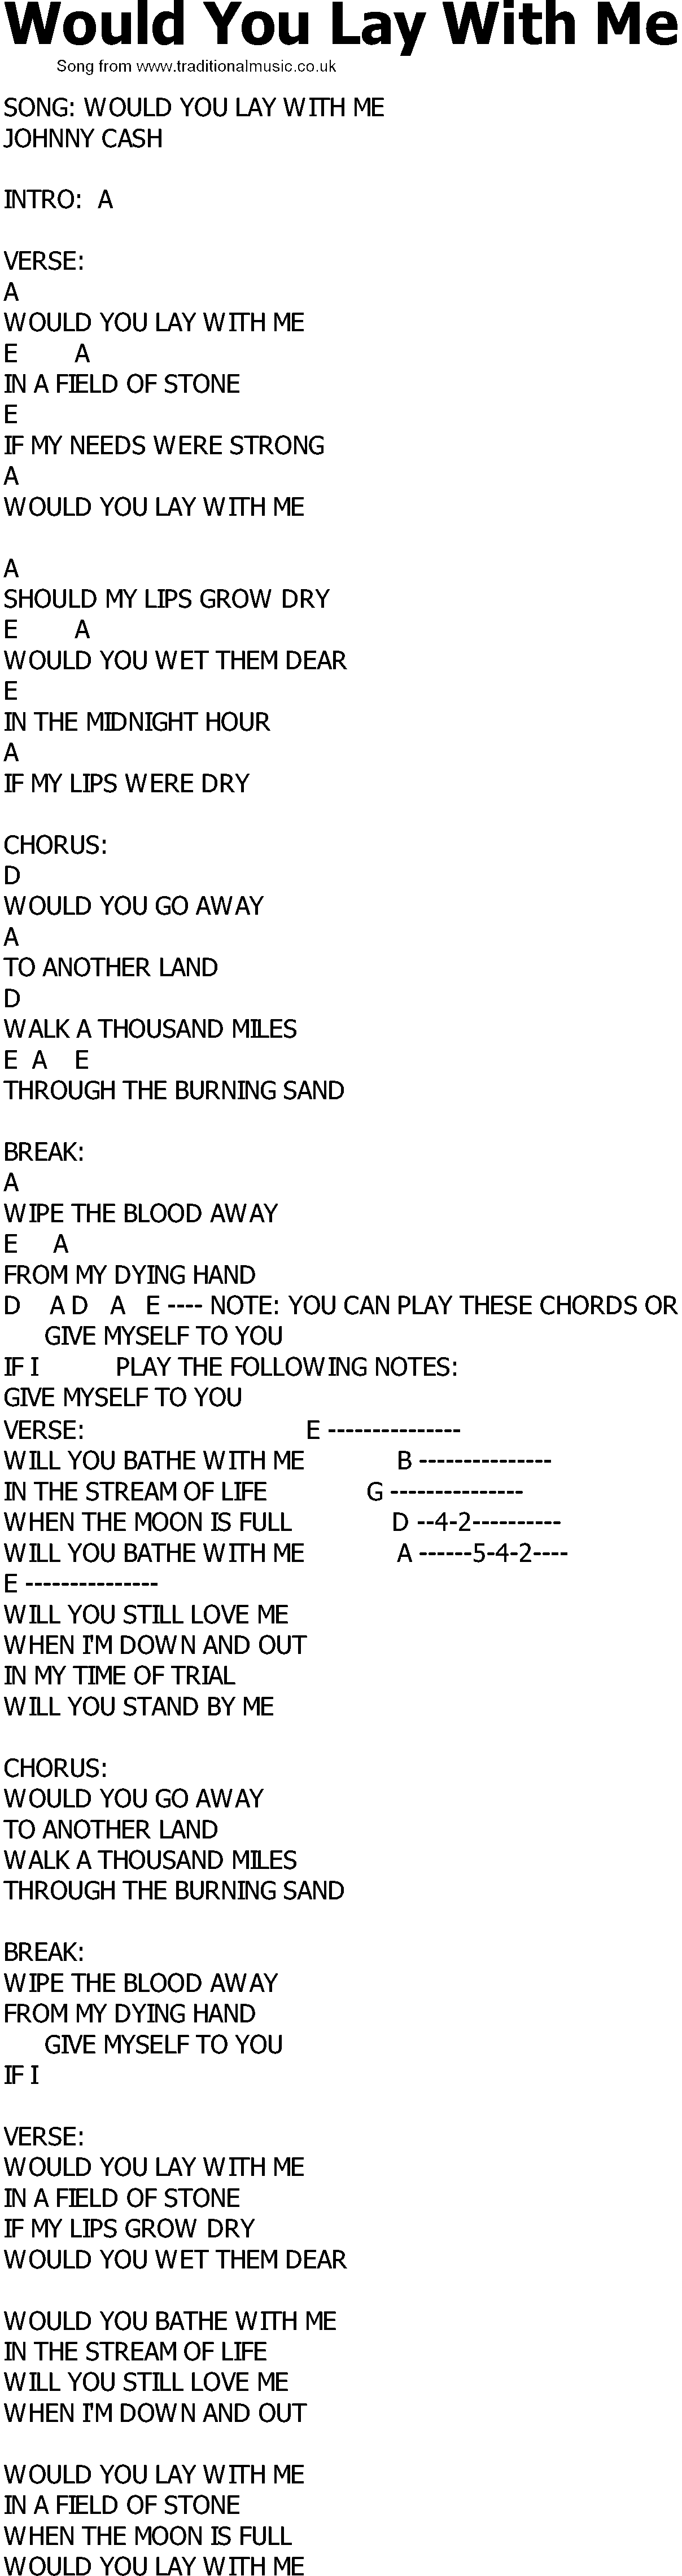 Old Country song lyrics with chords - Would You Lay With Me